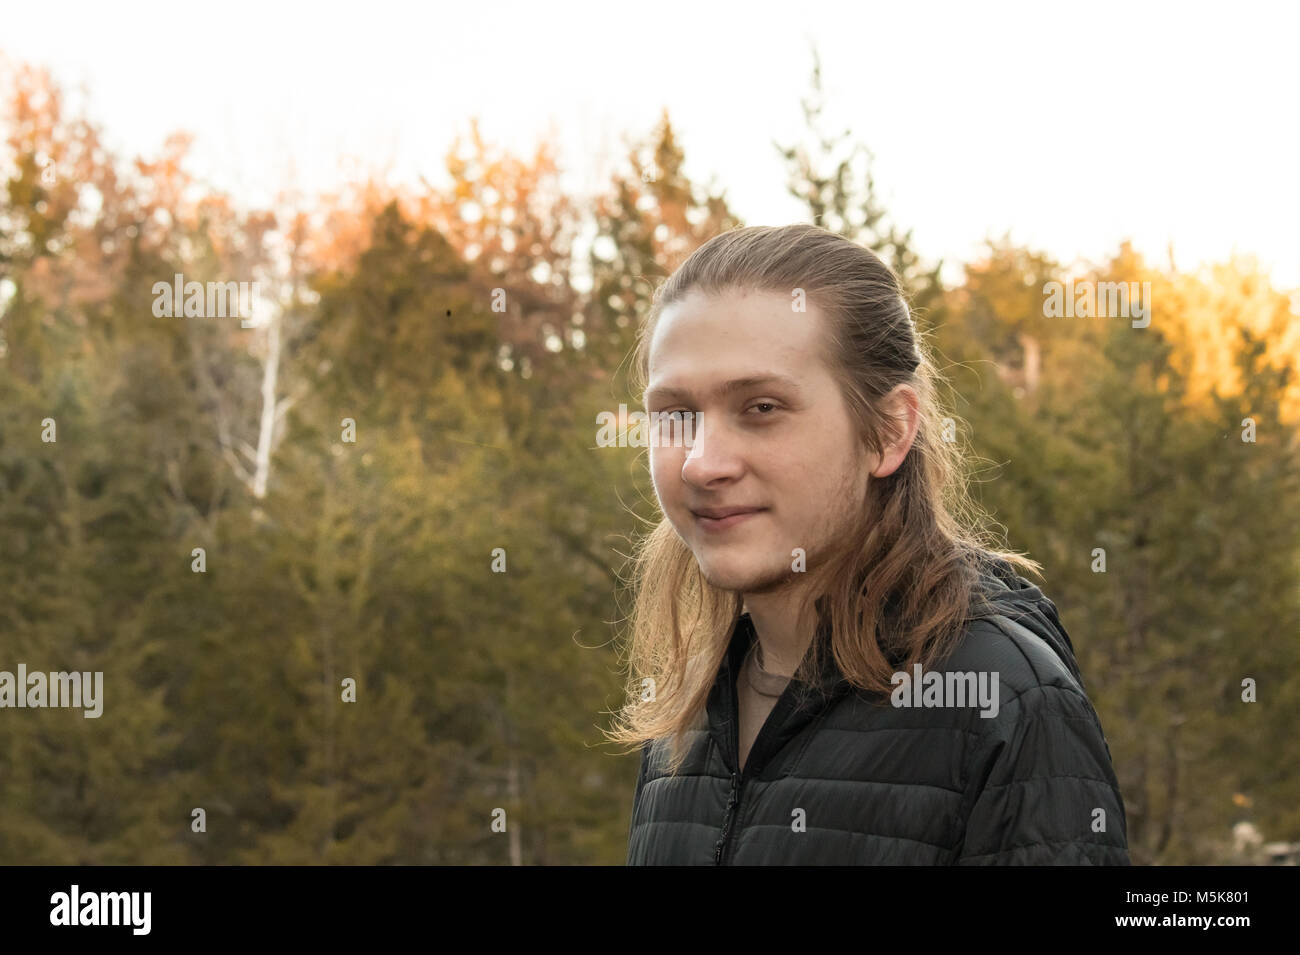 Portrait of a young man with long hair with trees in the background; late afternoon, sunset Stock Photo